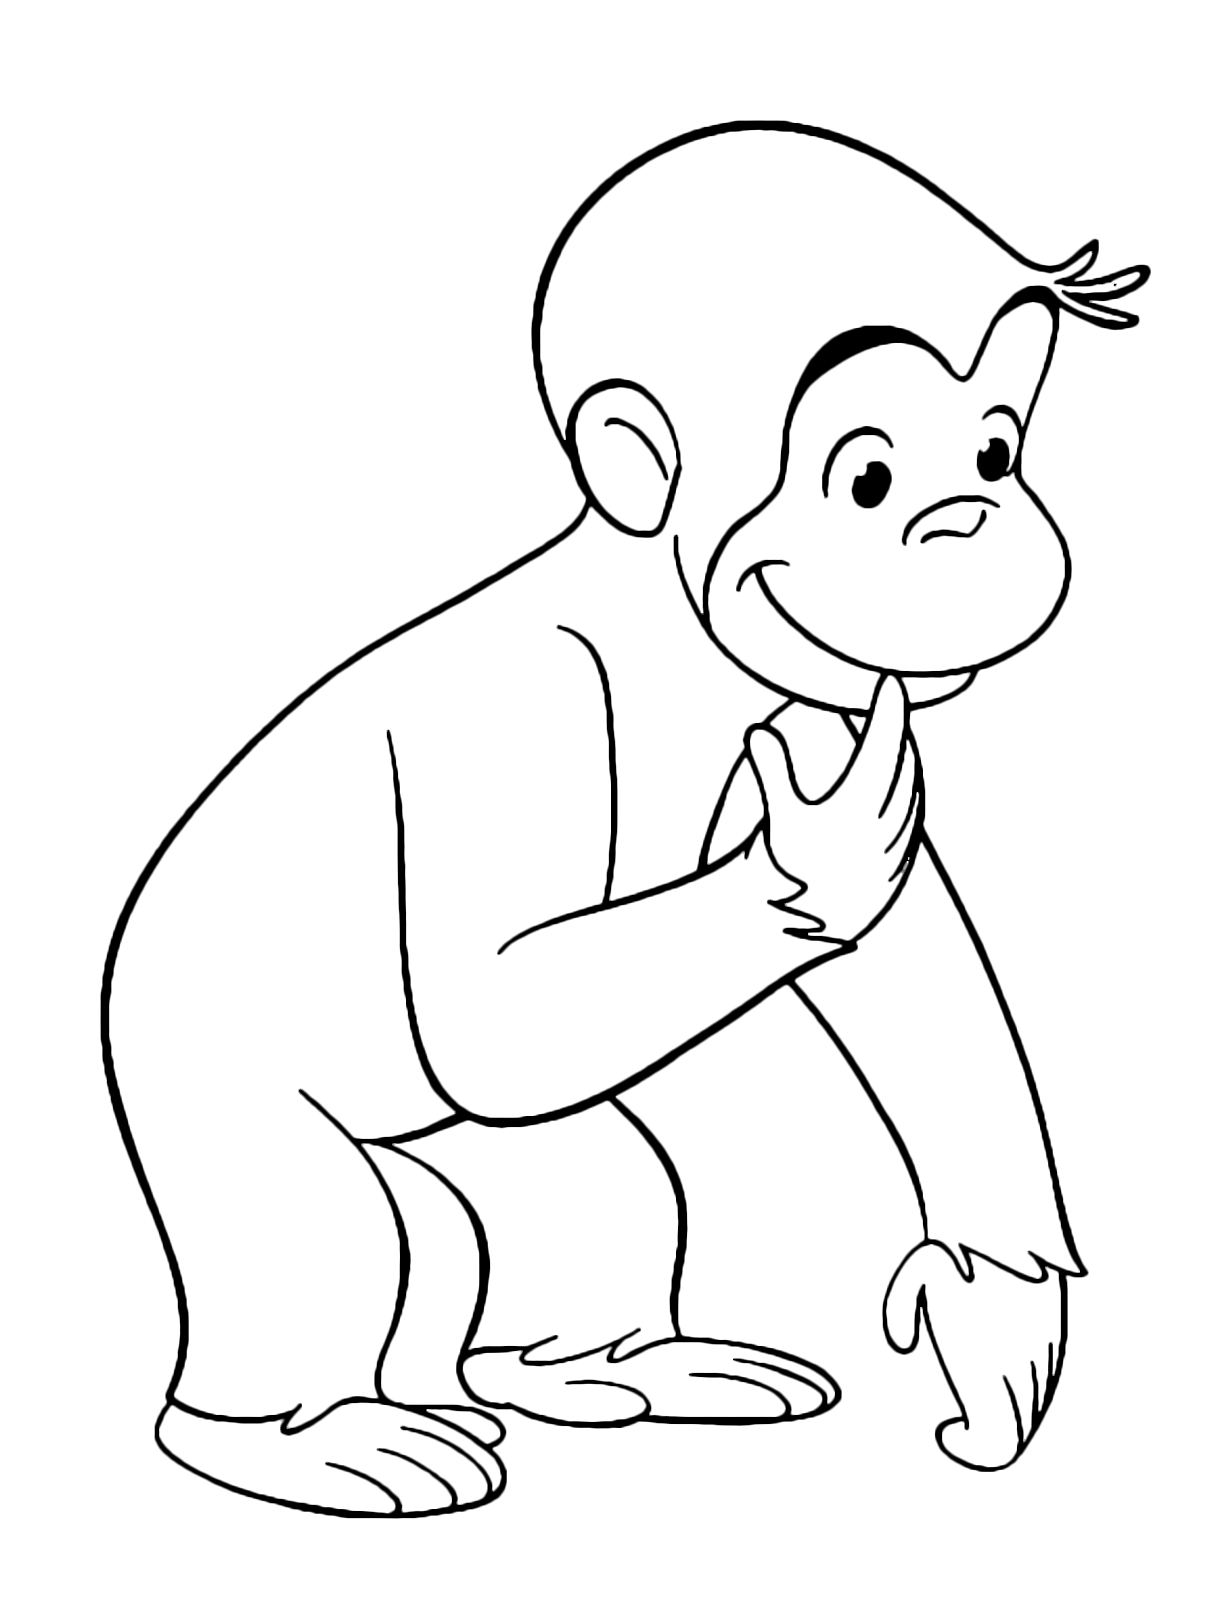 Curious George - George the monkey observes curiously